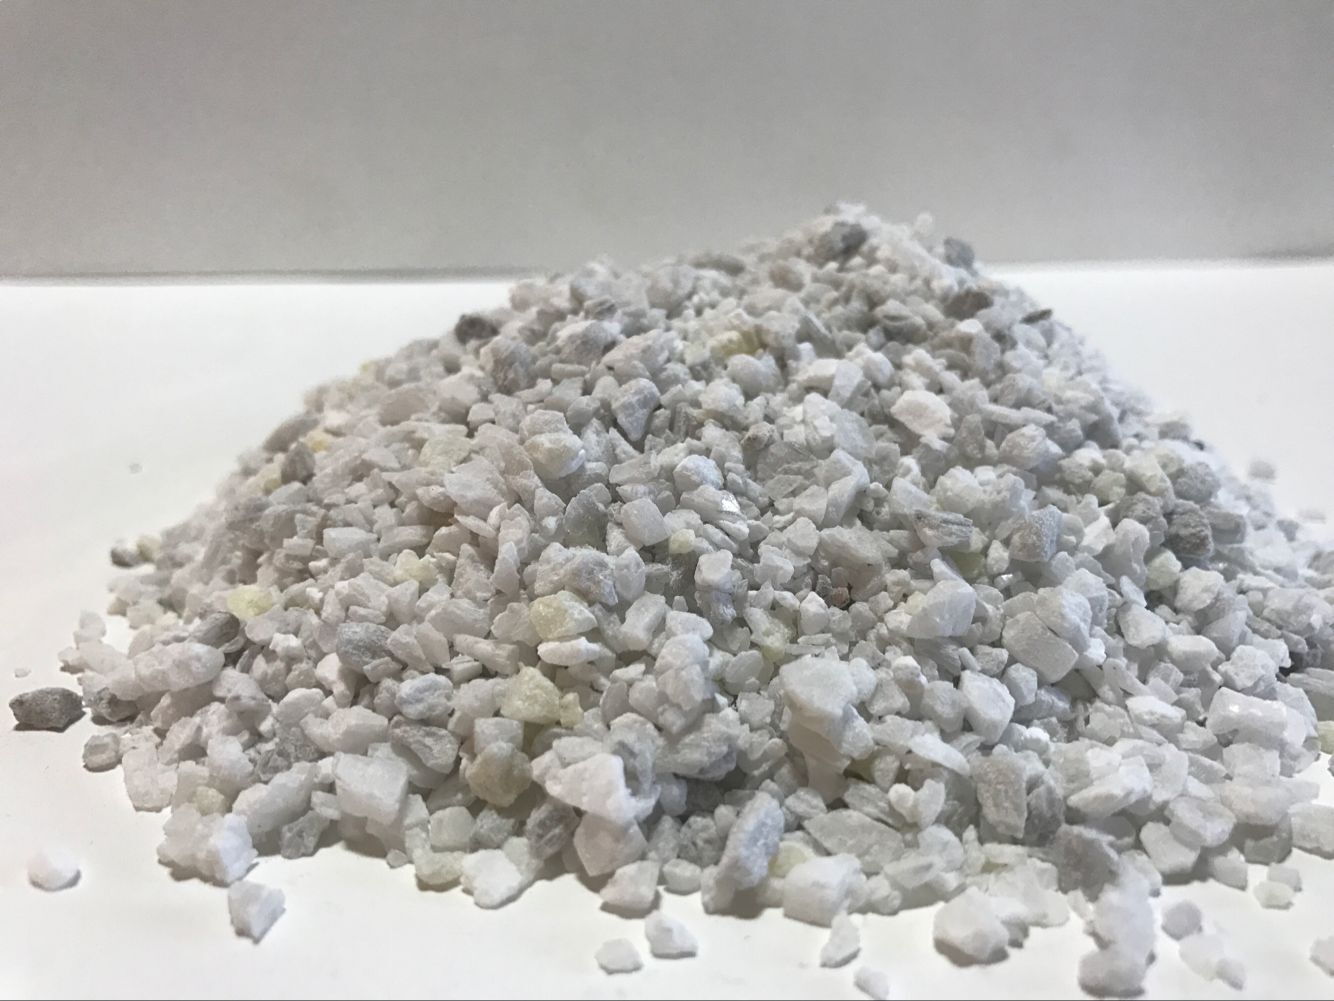 ISO factory manufacture competitive price  aluminium /magnesium fused  foundry flux used as covering slagging,refining,drossing ,removing  non-metallic inclusion flux in granulated form and spherical 